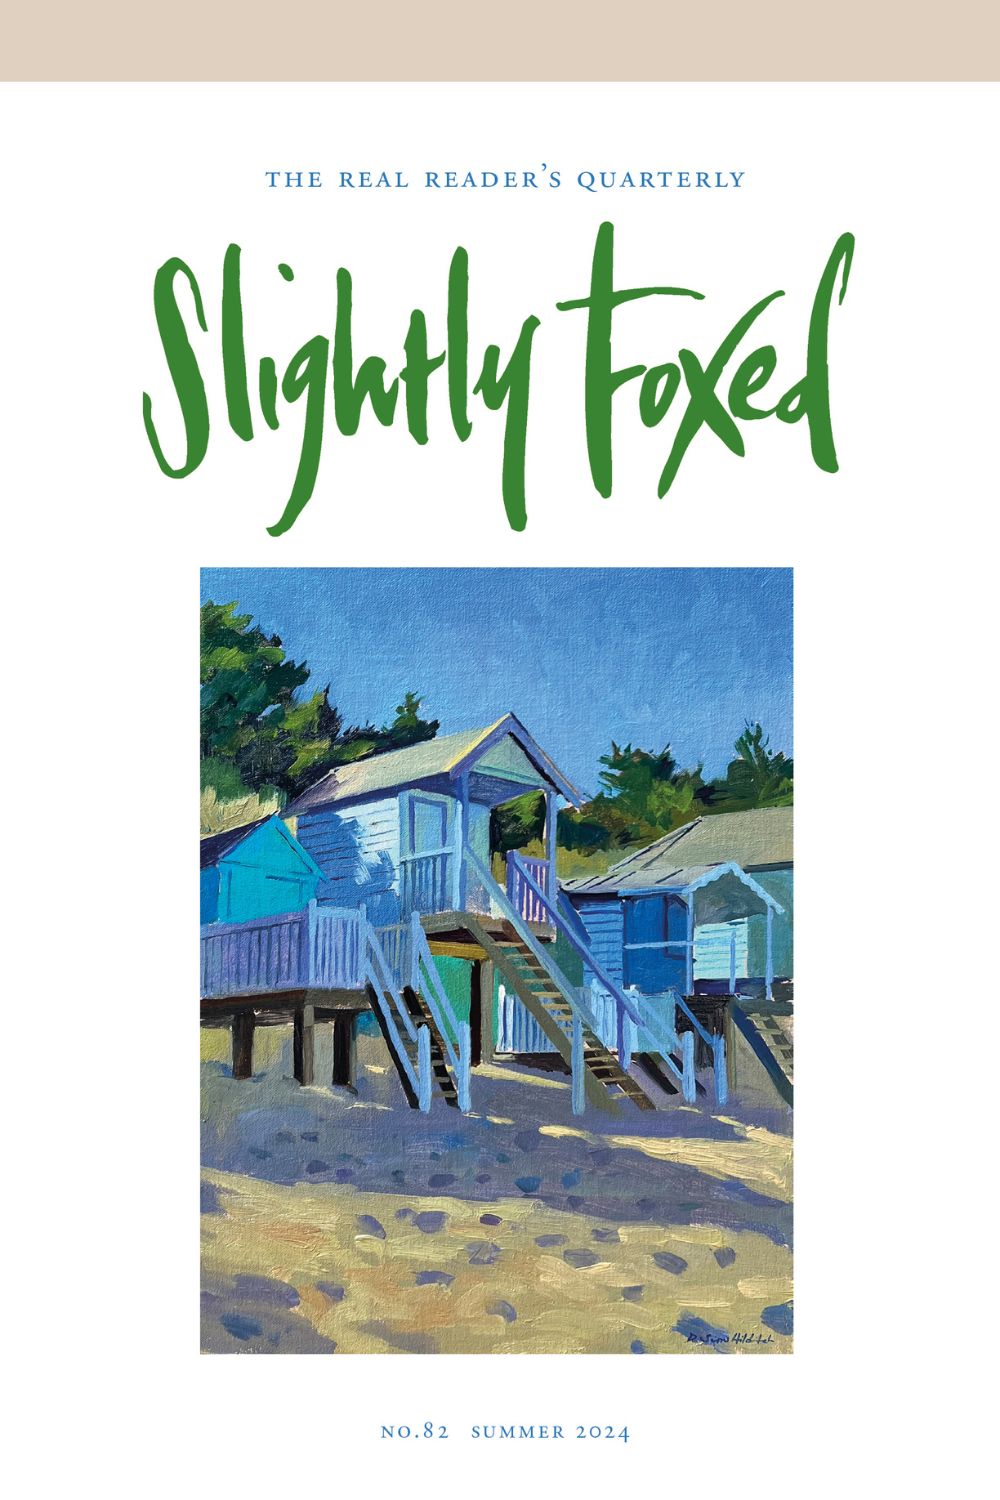 Slightly Foxed Issue 82 cover (beach cabin illustration)